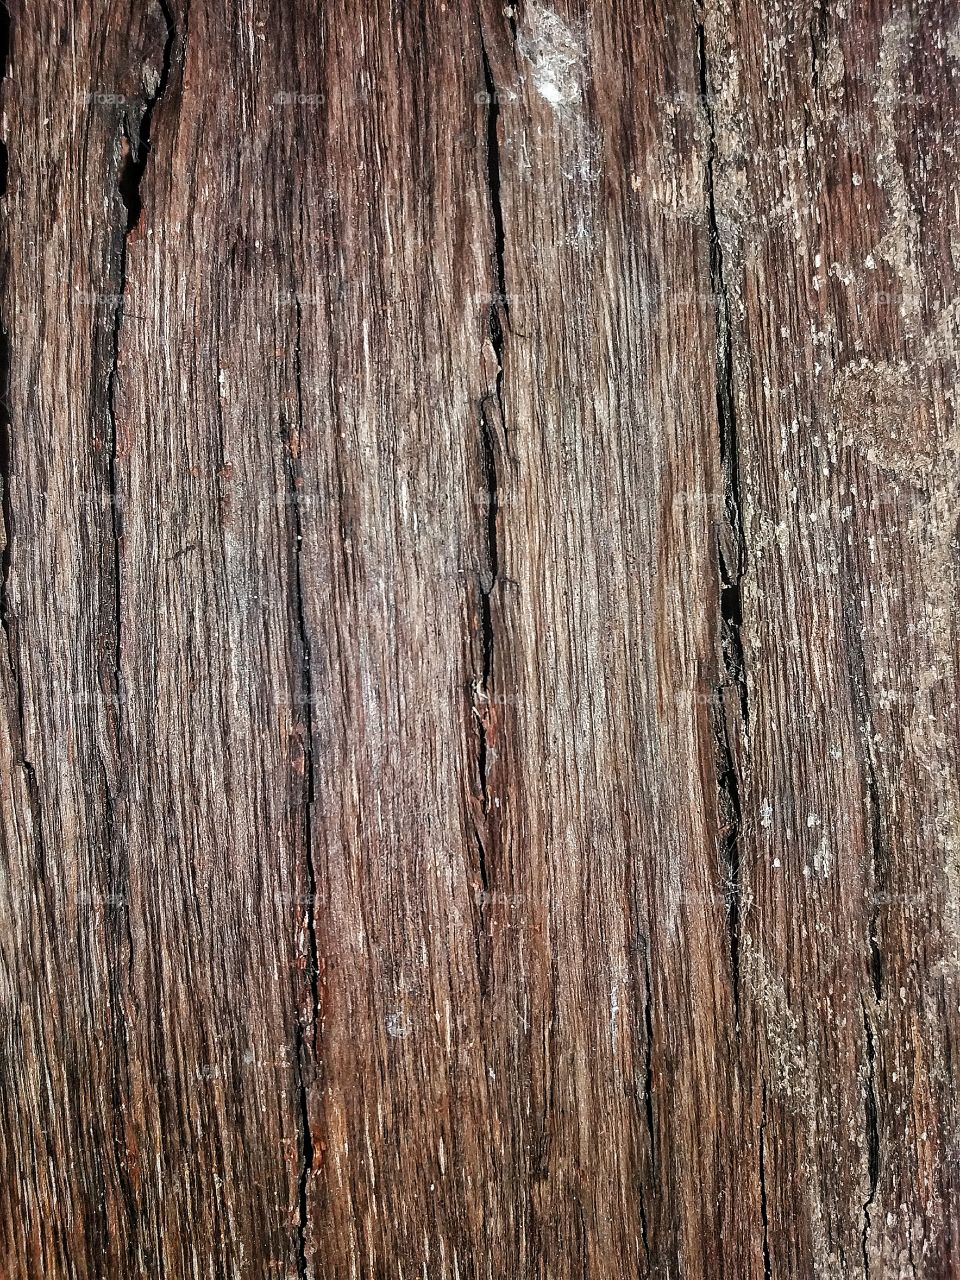 Dried wooden shell Background